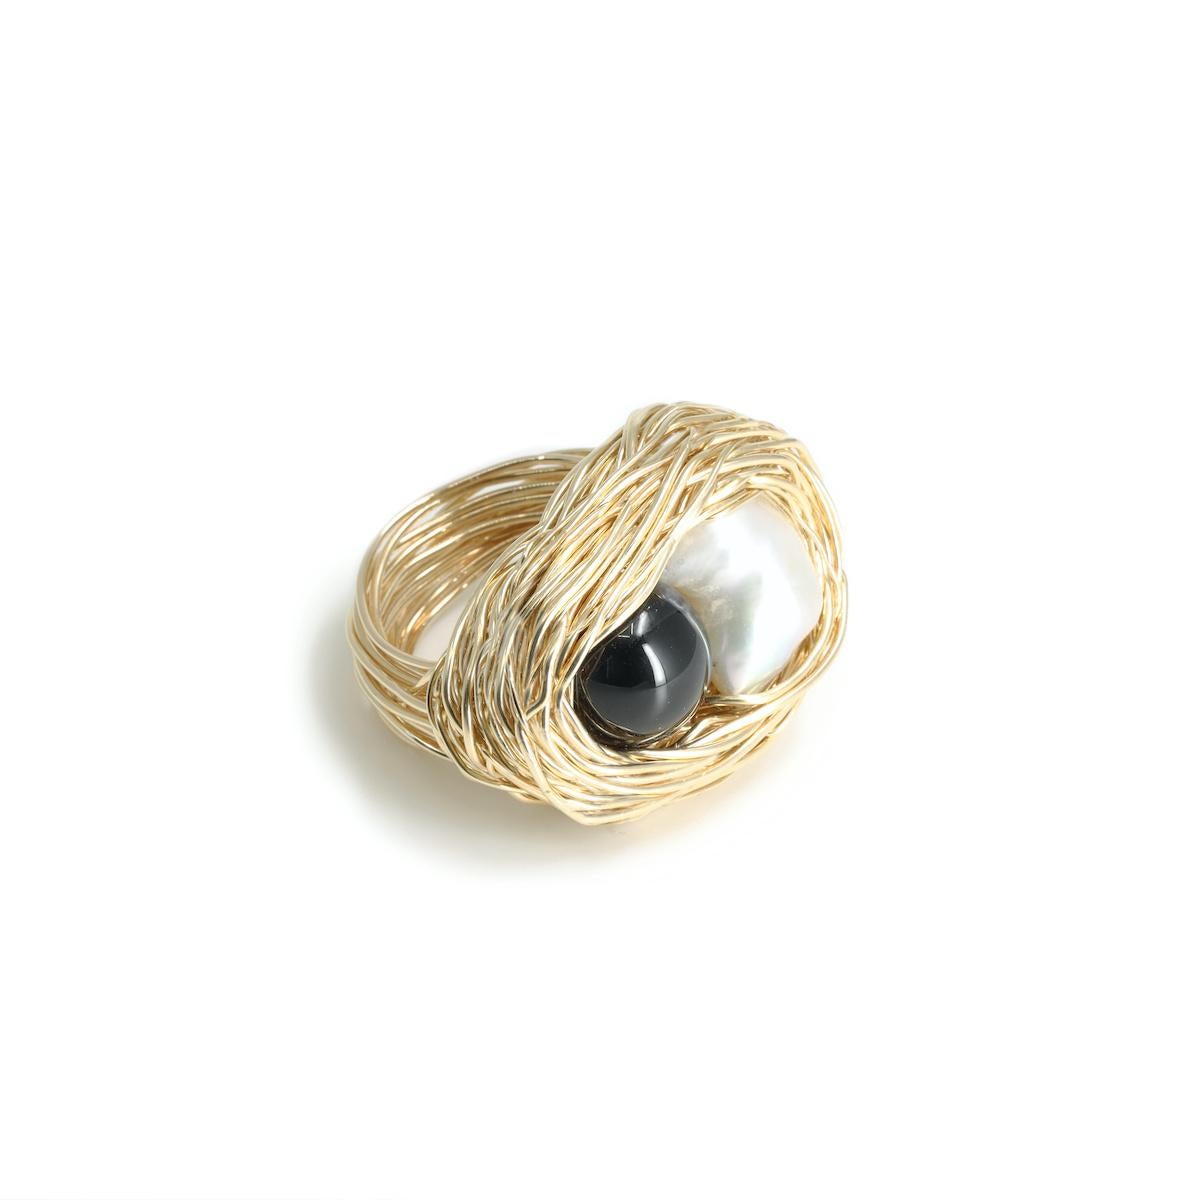 Rough Cut Pearl & Onyx in 14 Kt Gold F One-Off Cocktail Statement Ring by the Artist For Sale